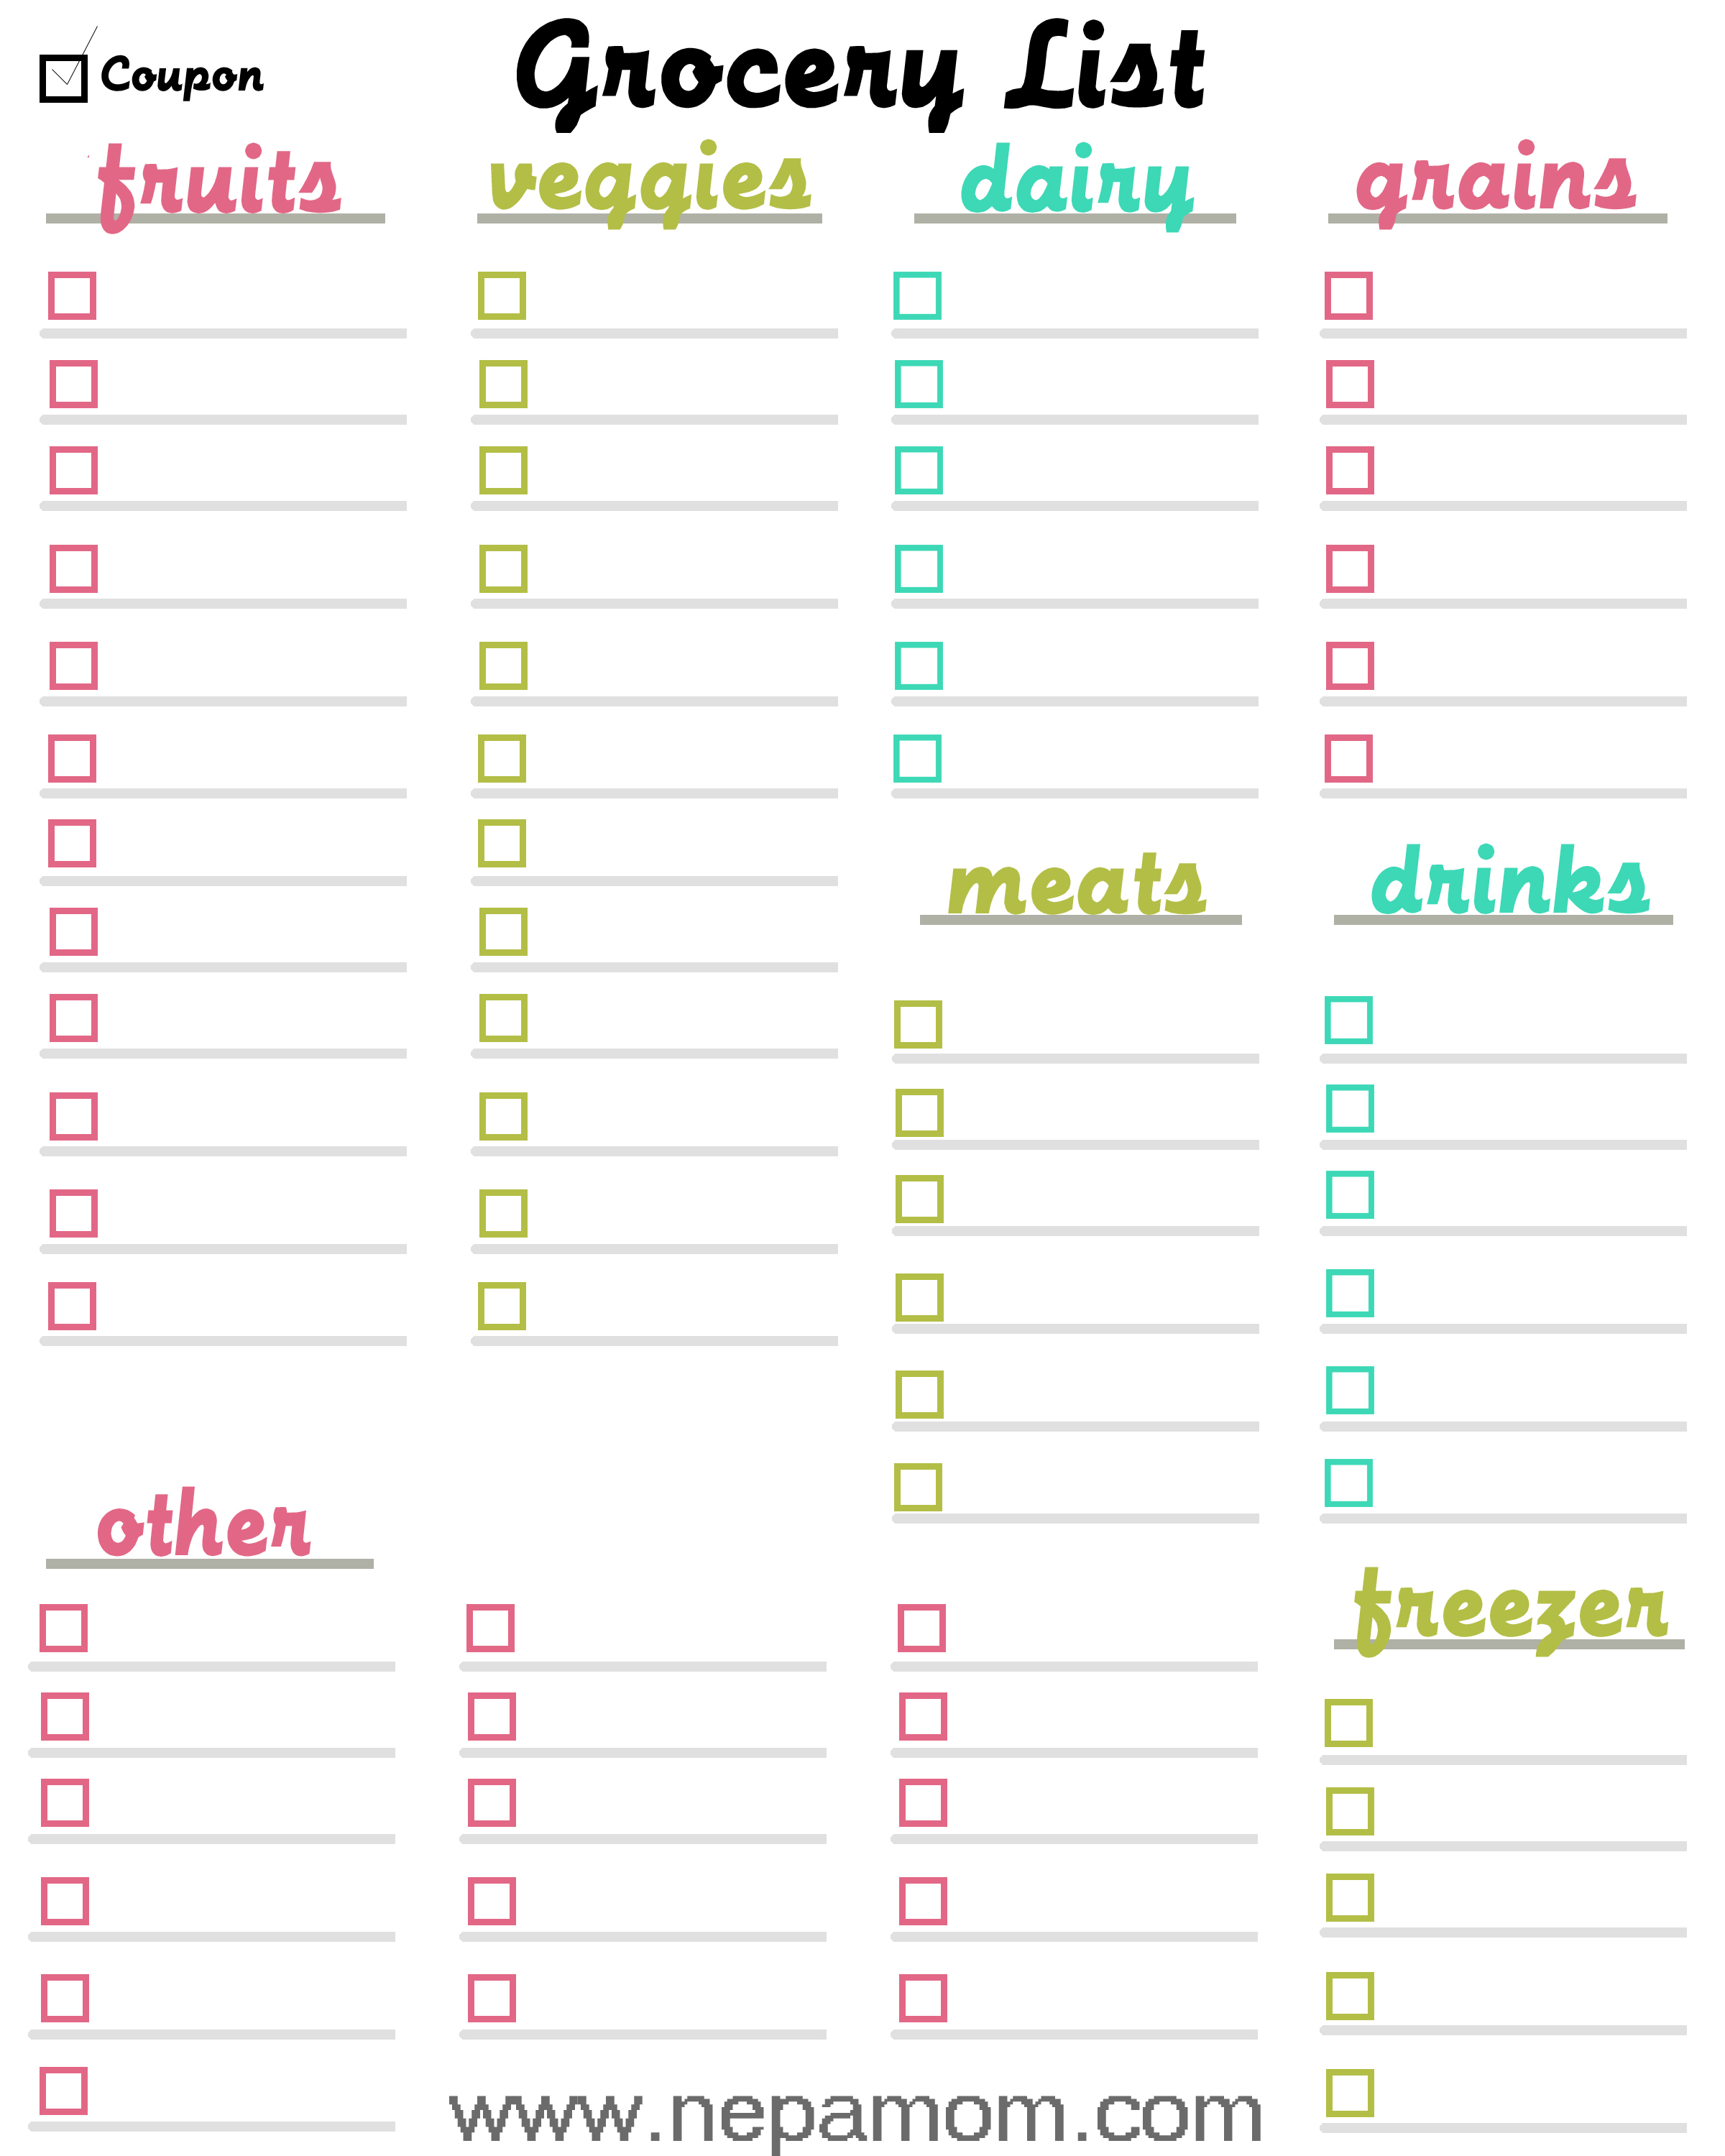 Grocery Shopping List Template--This easy list helps keep you organized and saves you money!